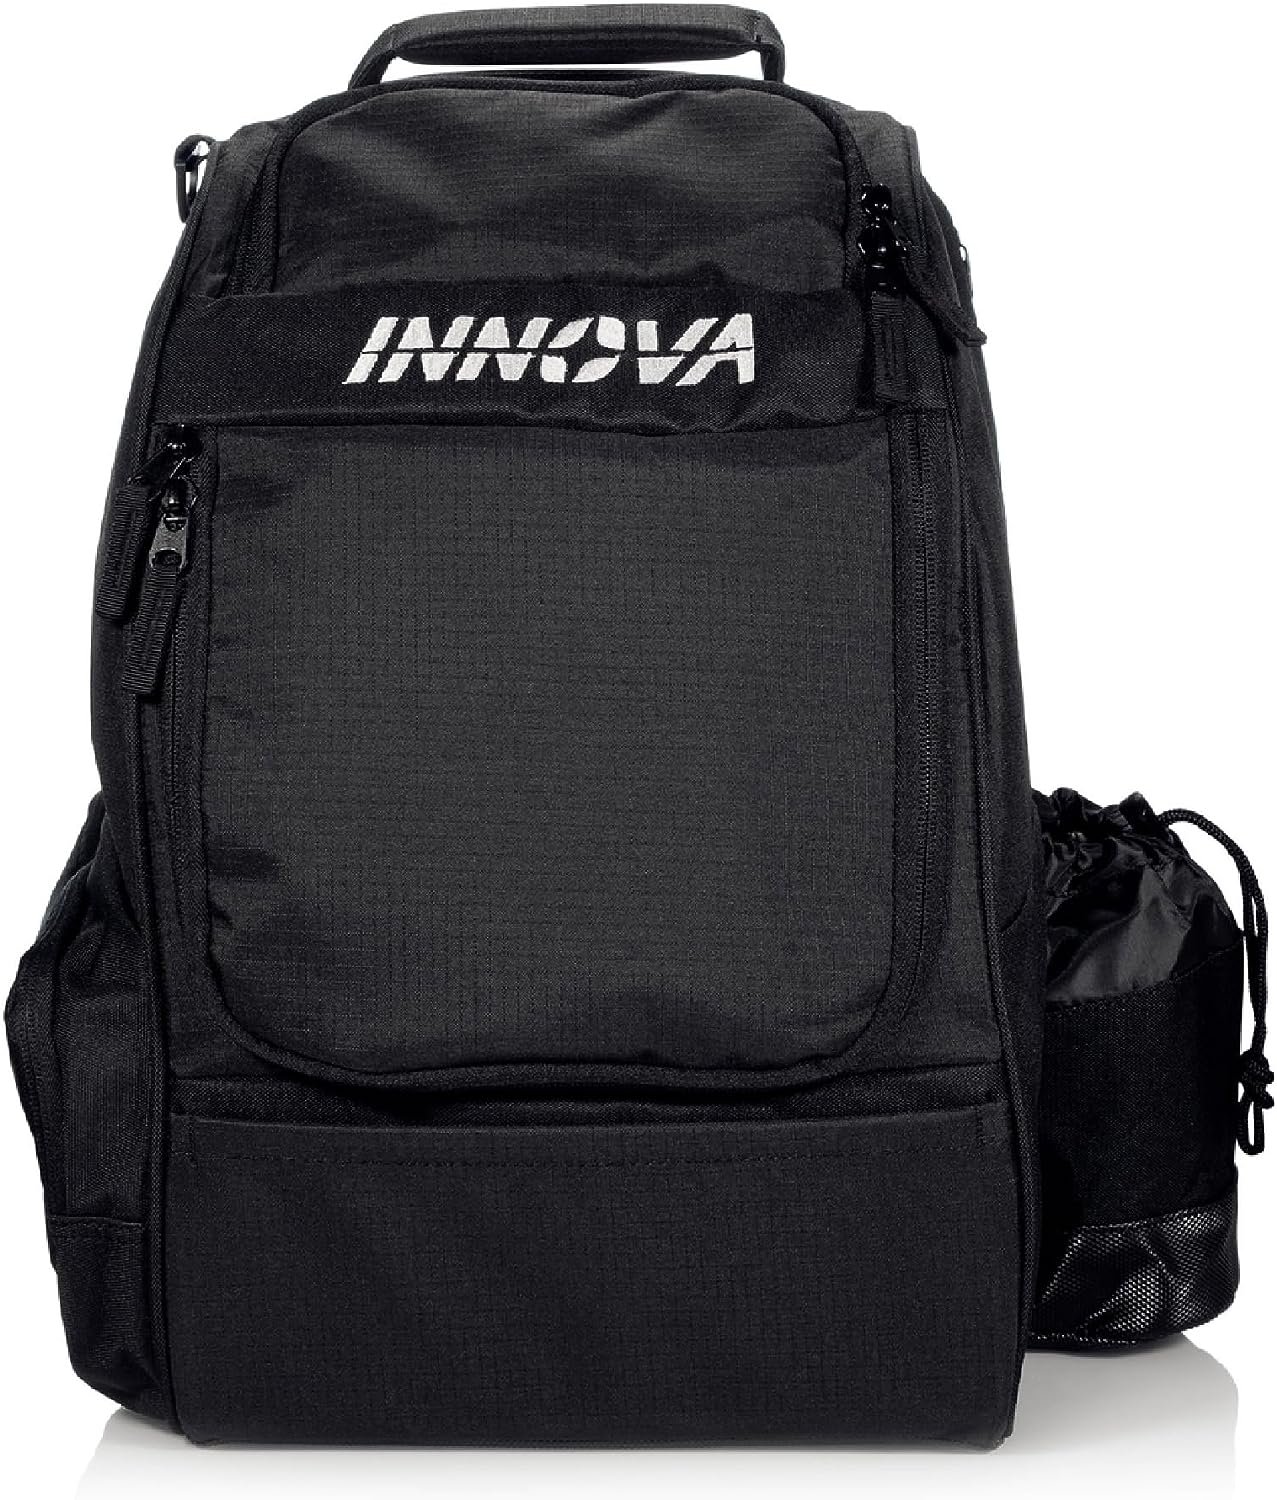 Innova Adventure Pack Backpack Disc Golf Bag – Holds 25 Discs – Lightweight – Includes Limited Edition Stars Mini